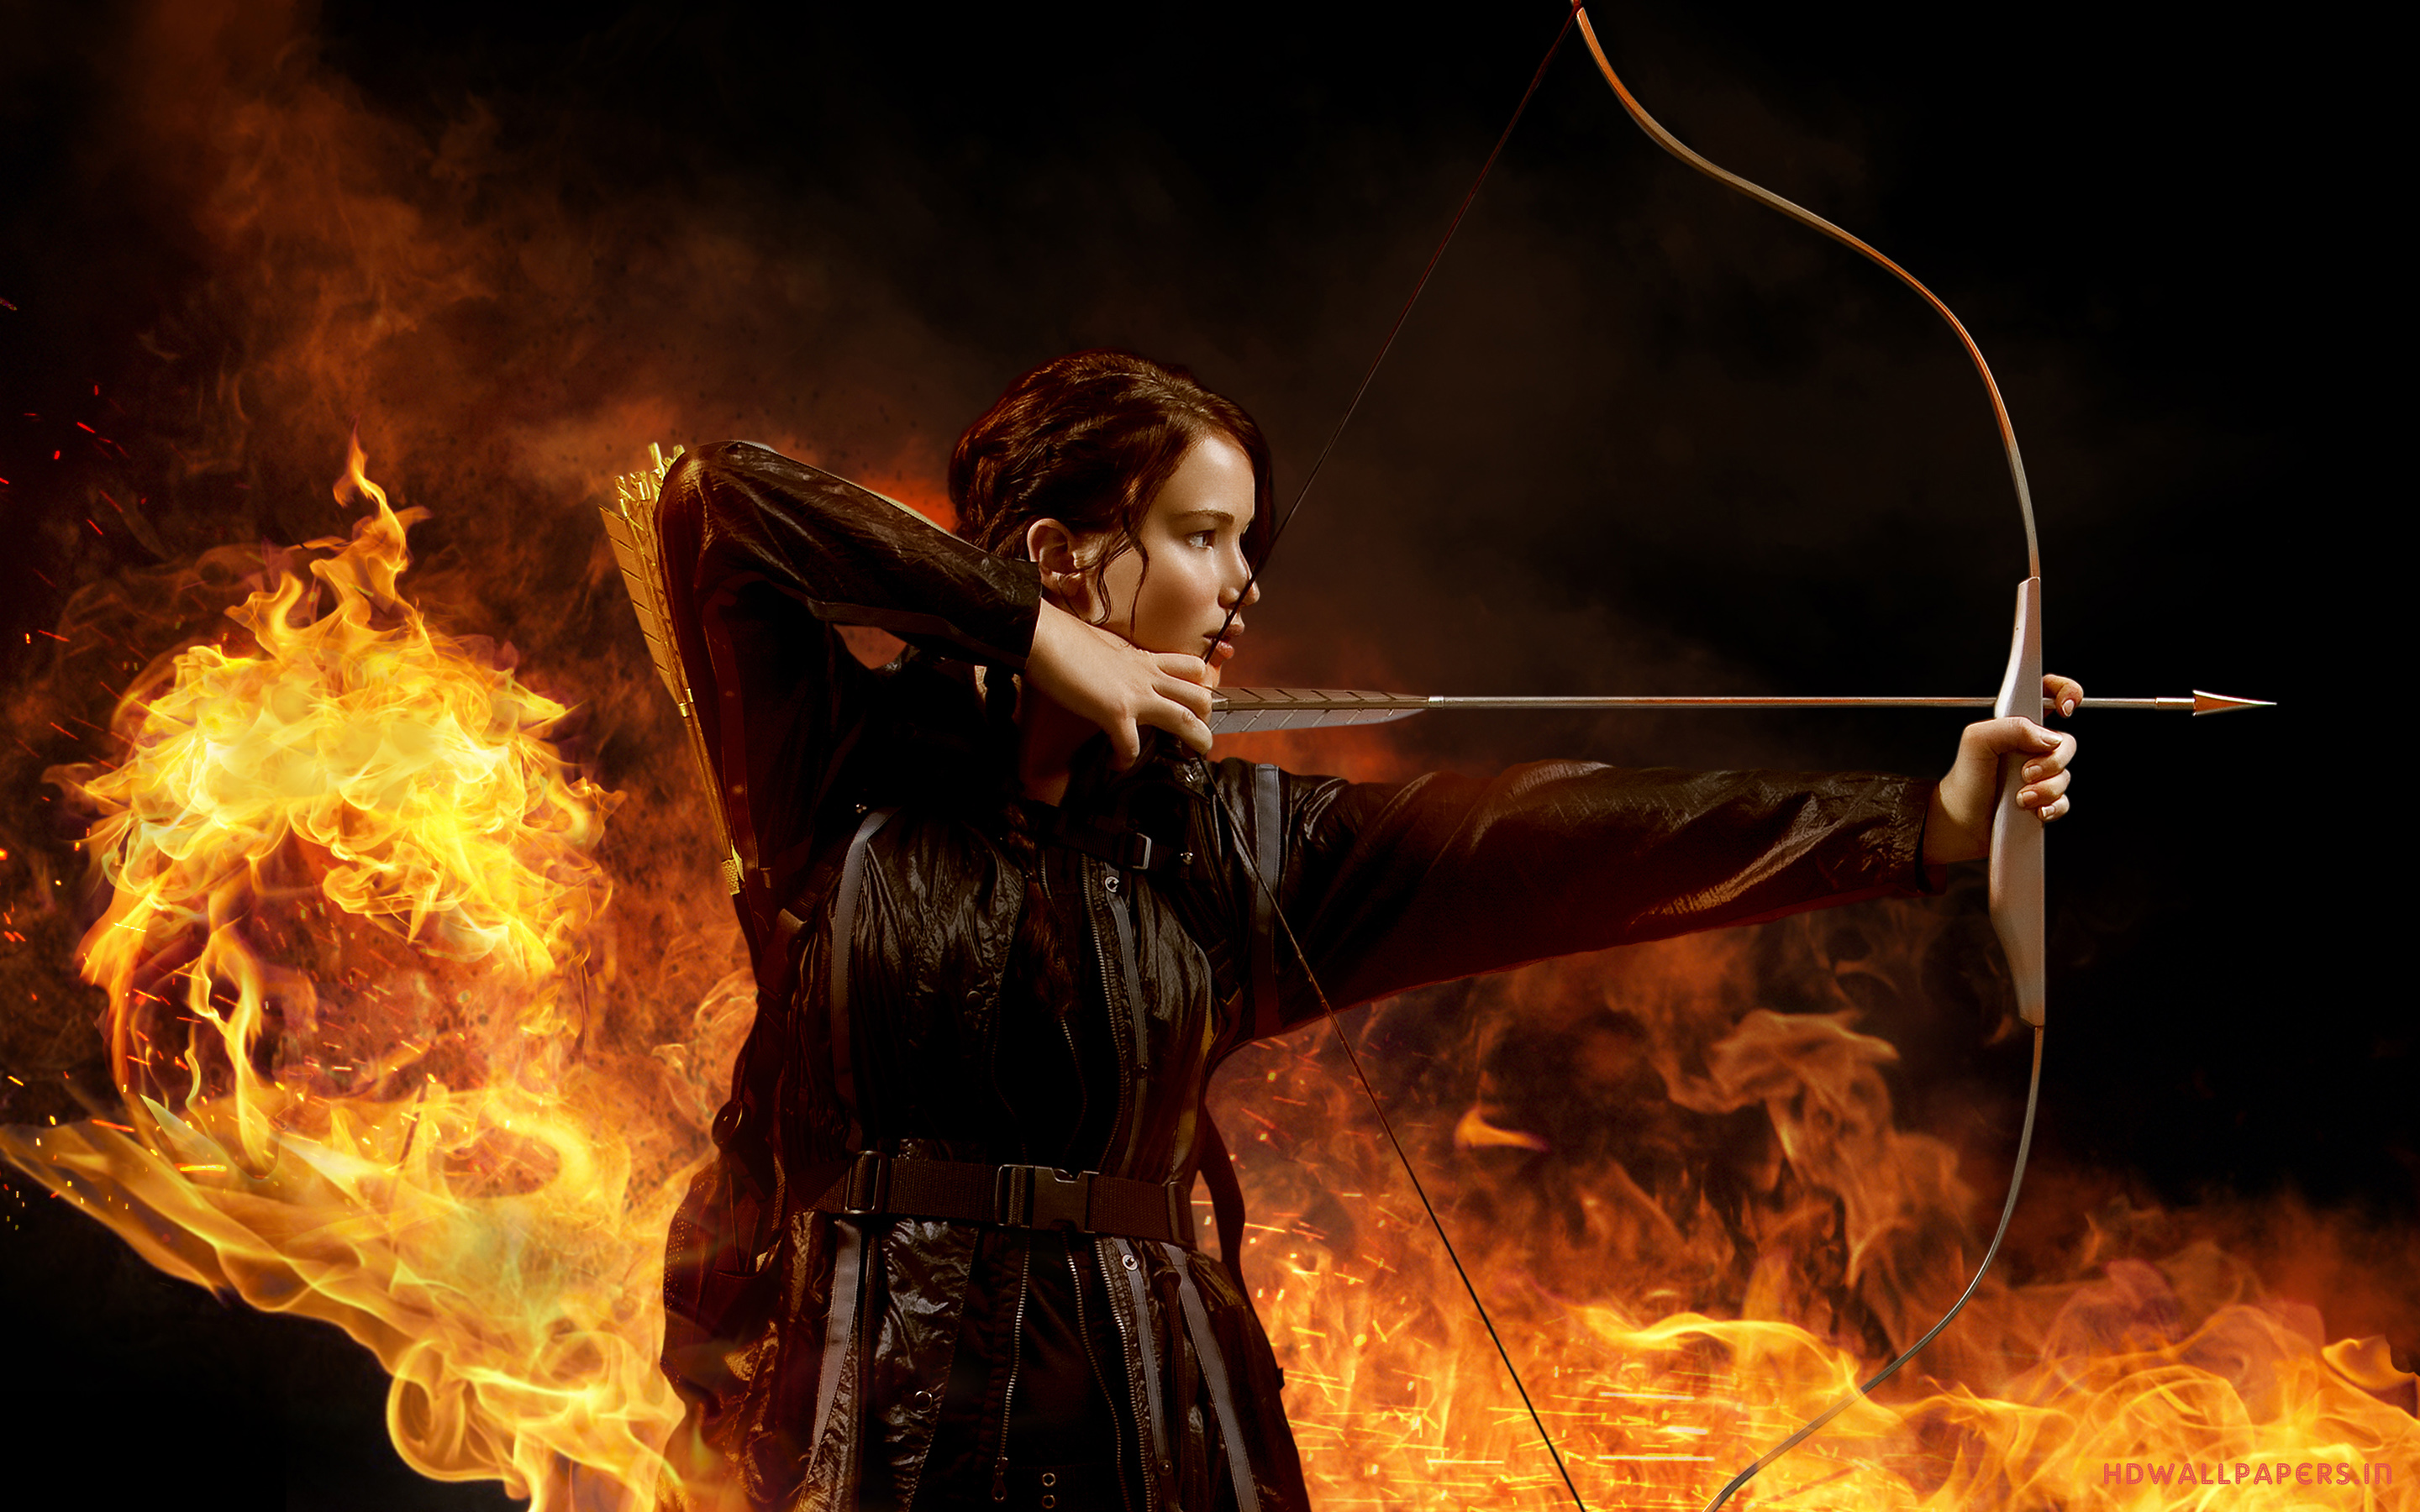 Jennifer Lawrence in The Hunger Games Wallpapers HD Wallpapers